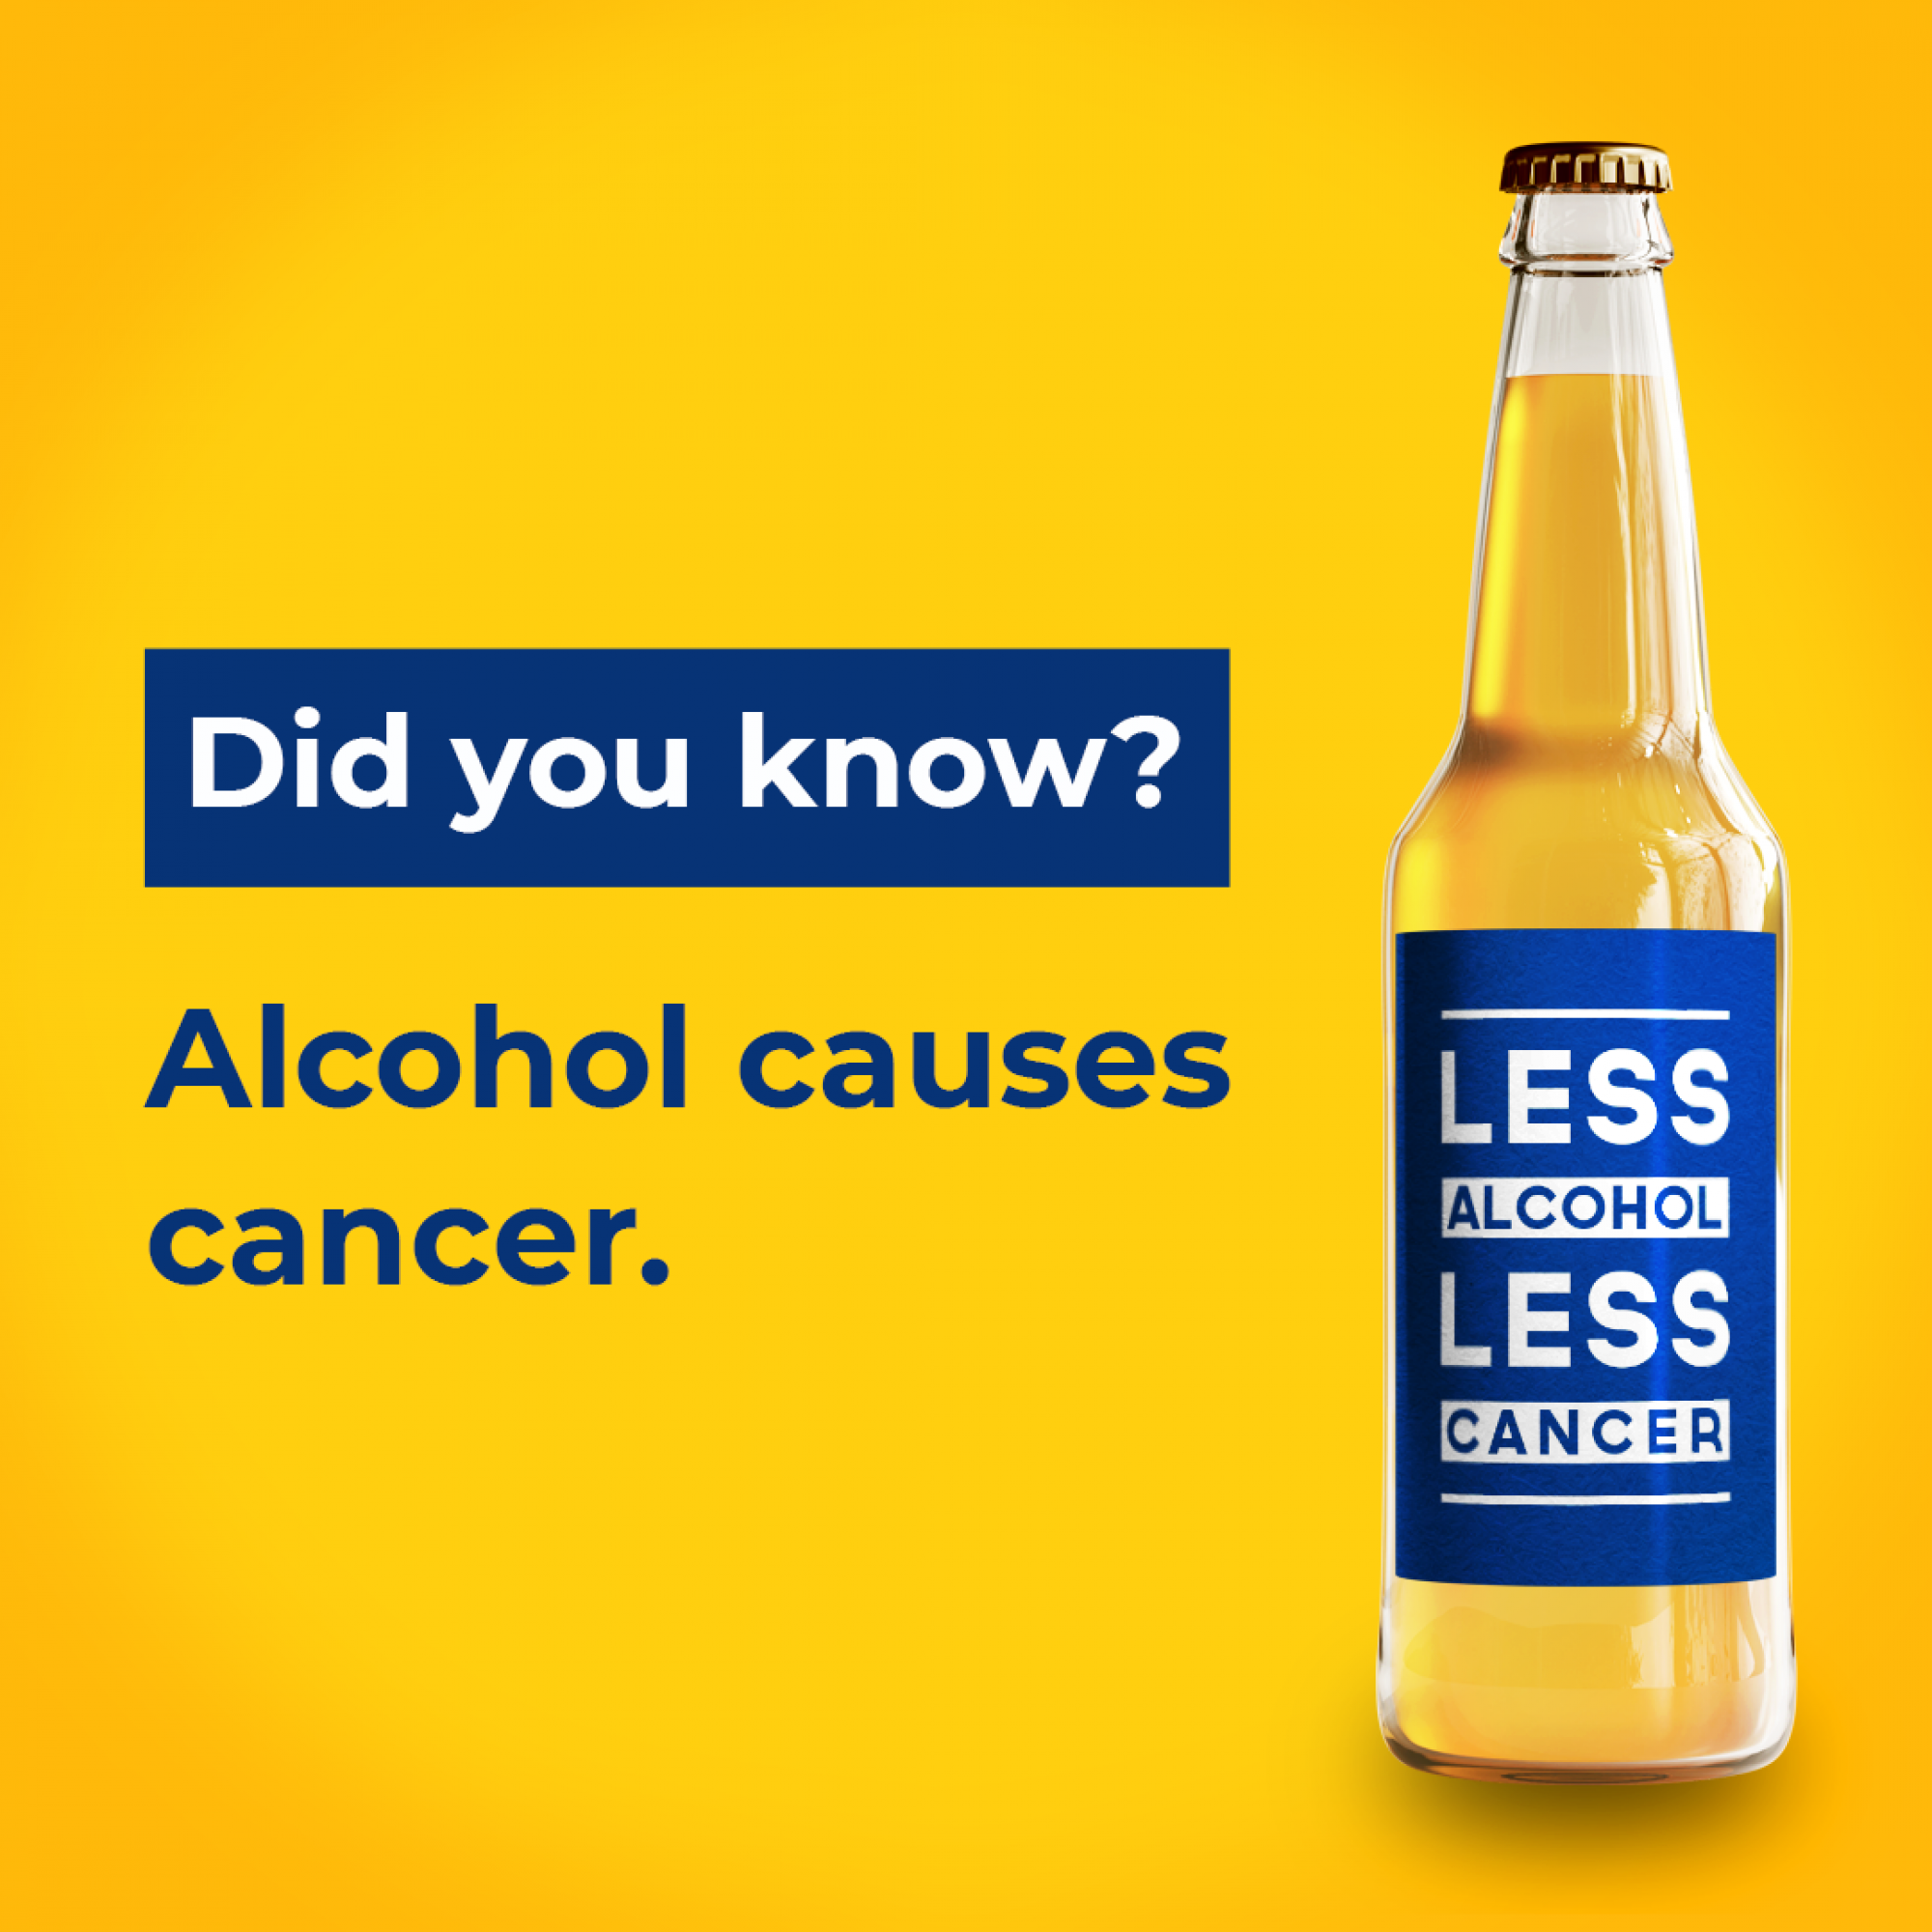 Did you know? Alcohol causes cancer. Source: Cancer Society of New Zealand.